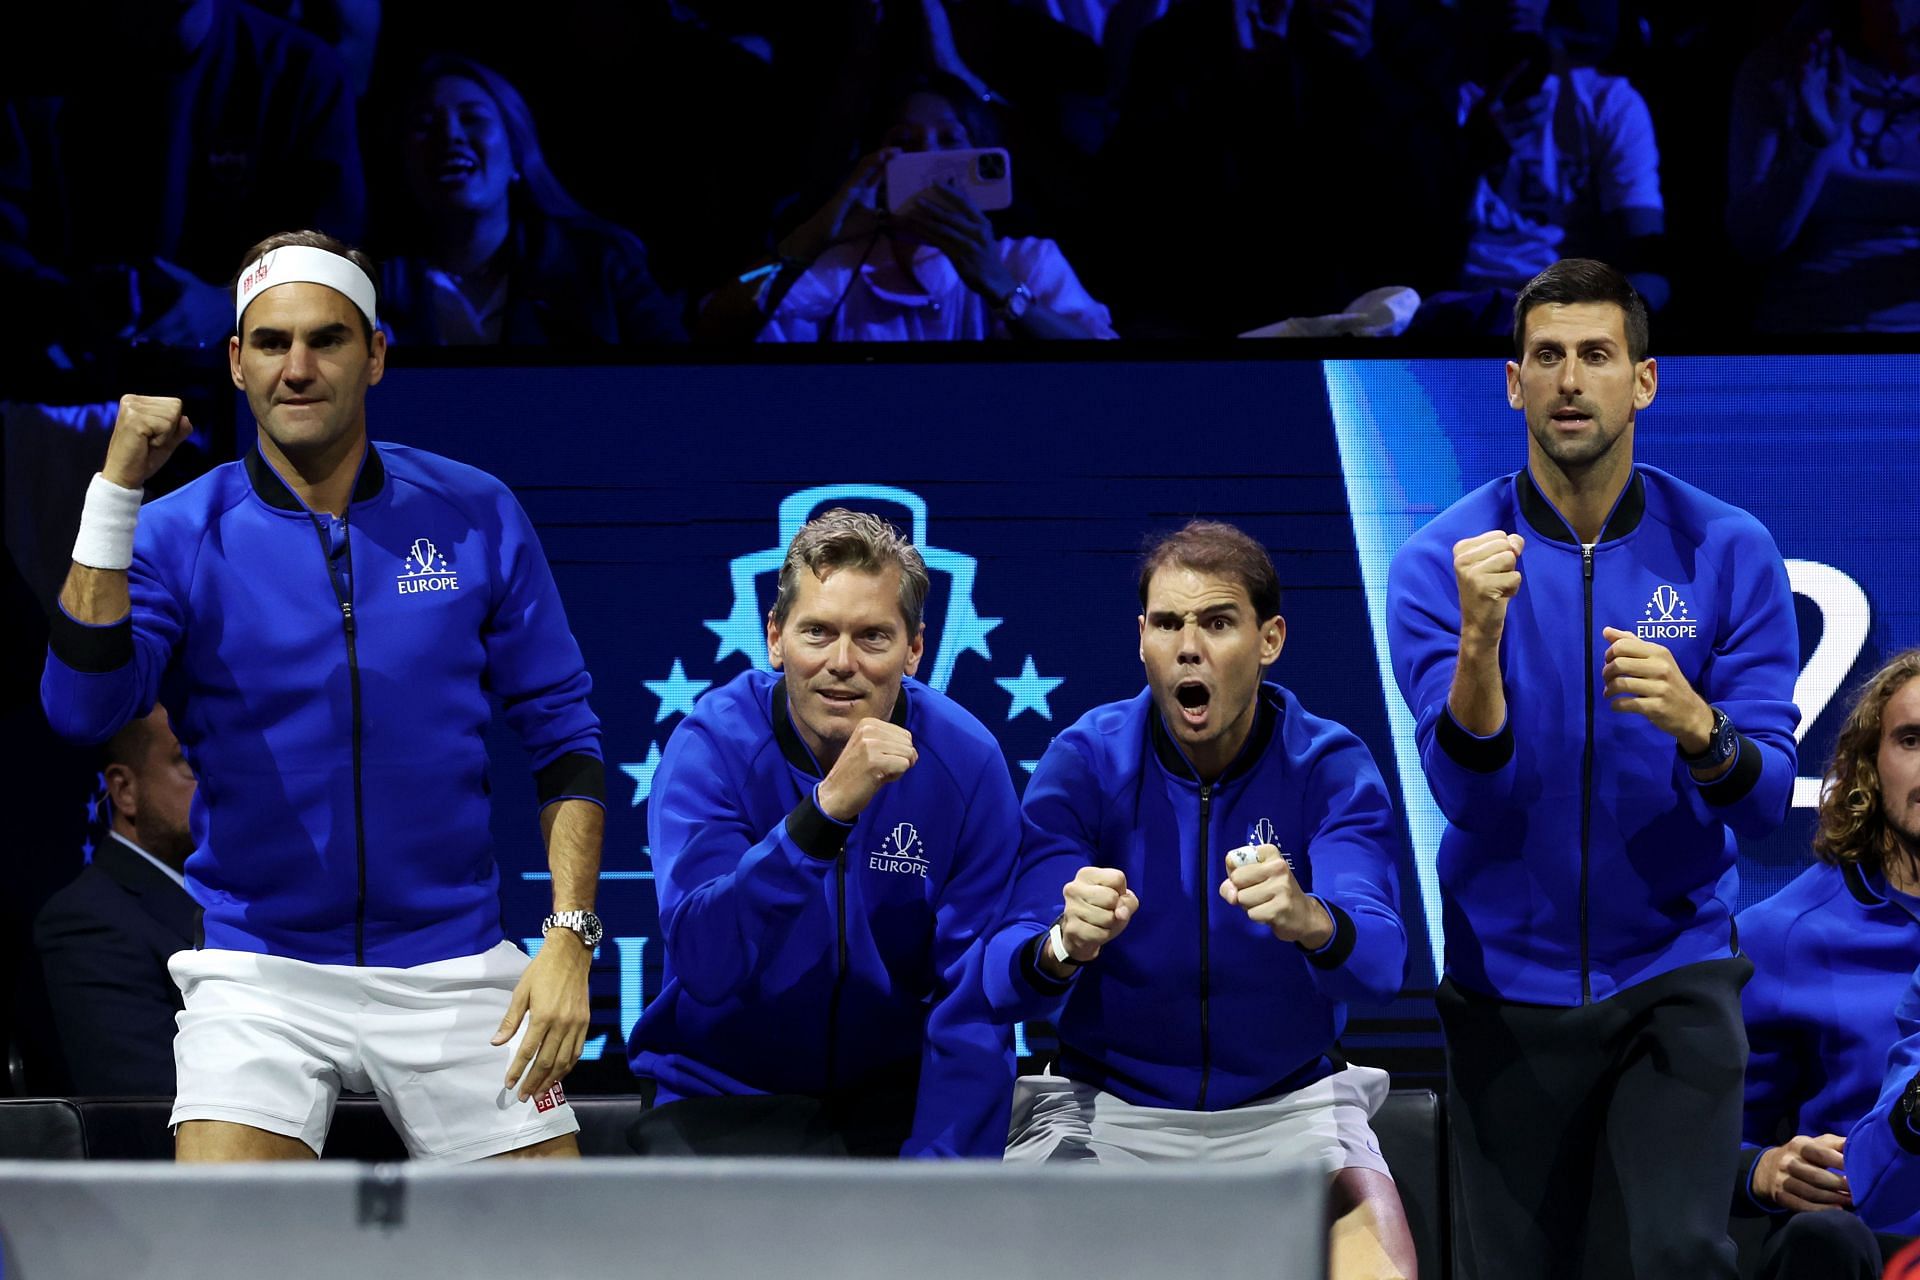 Roger Federer, Rafael Nadal and Novak Djokovic at the Laver Cup - Getty Images